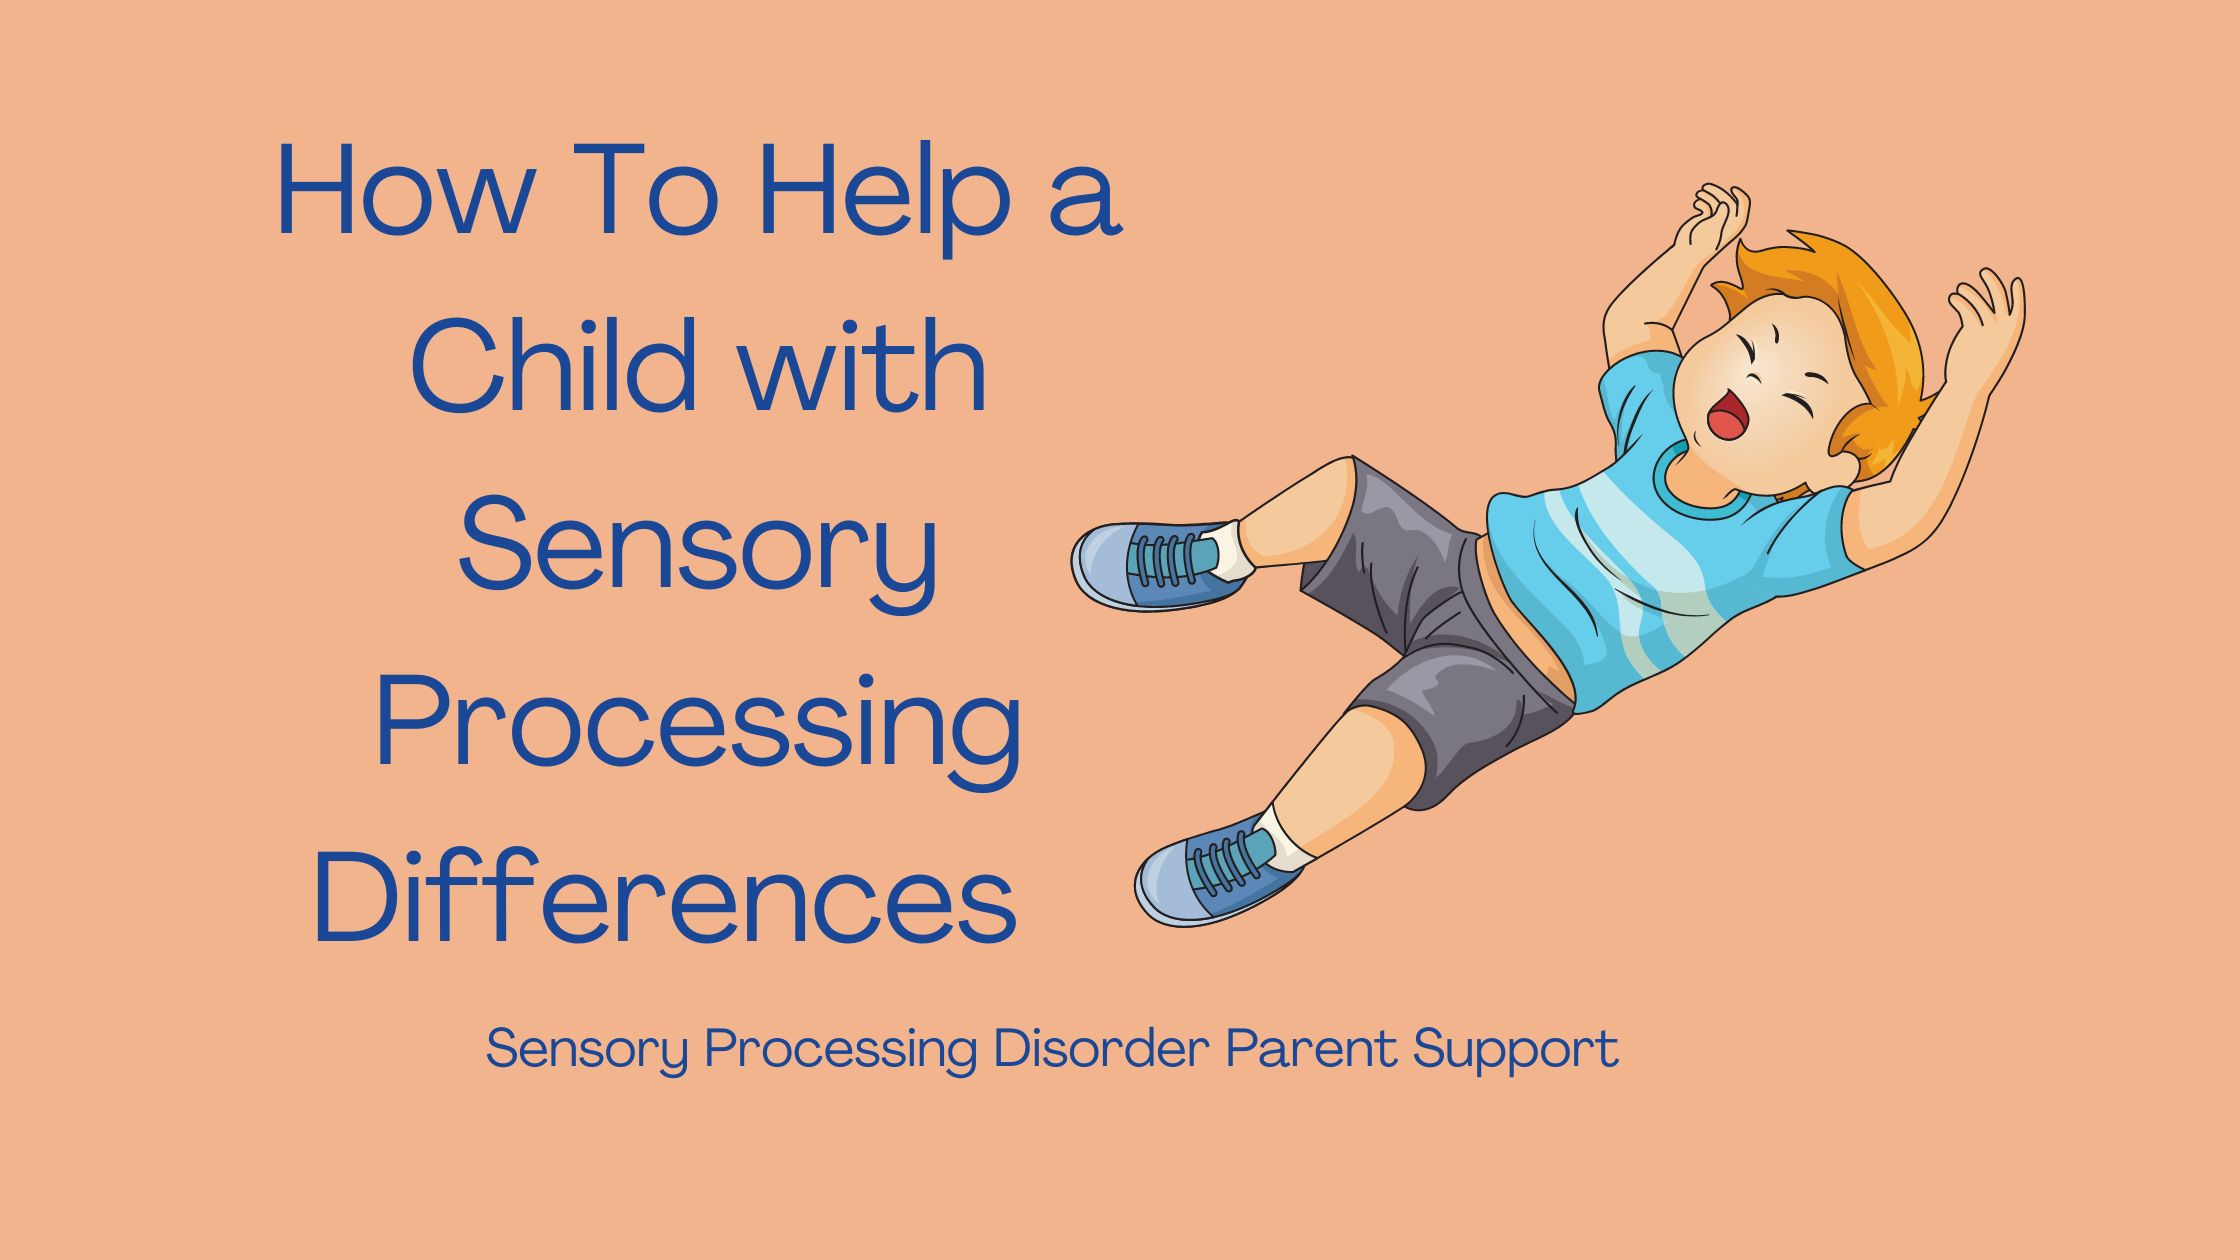 child having a sensory meltdown How To Help a Child with Sensory Processing Differences